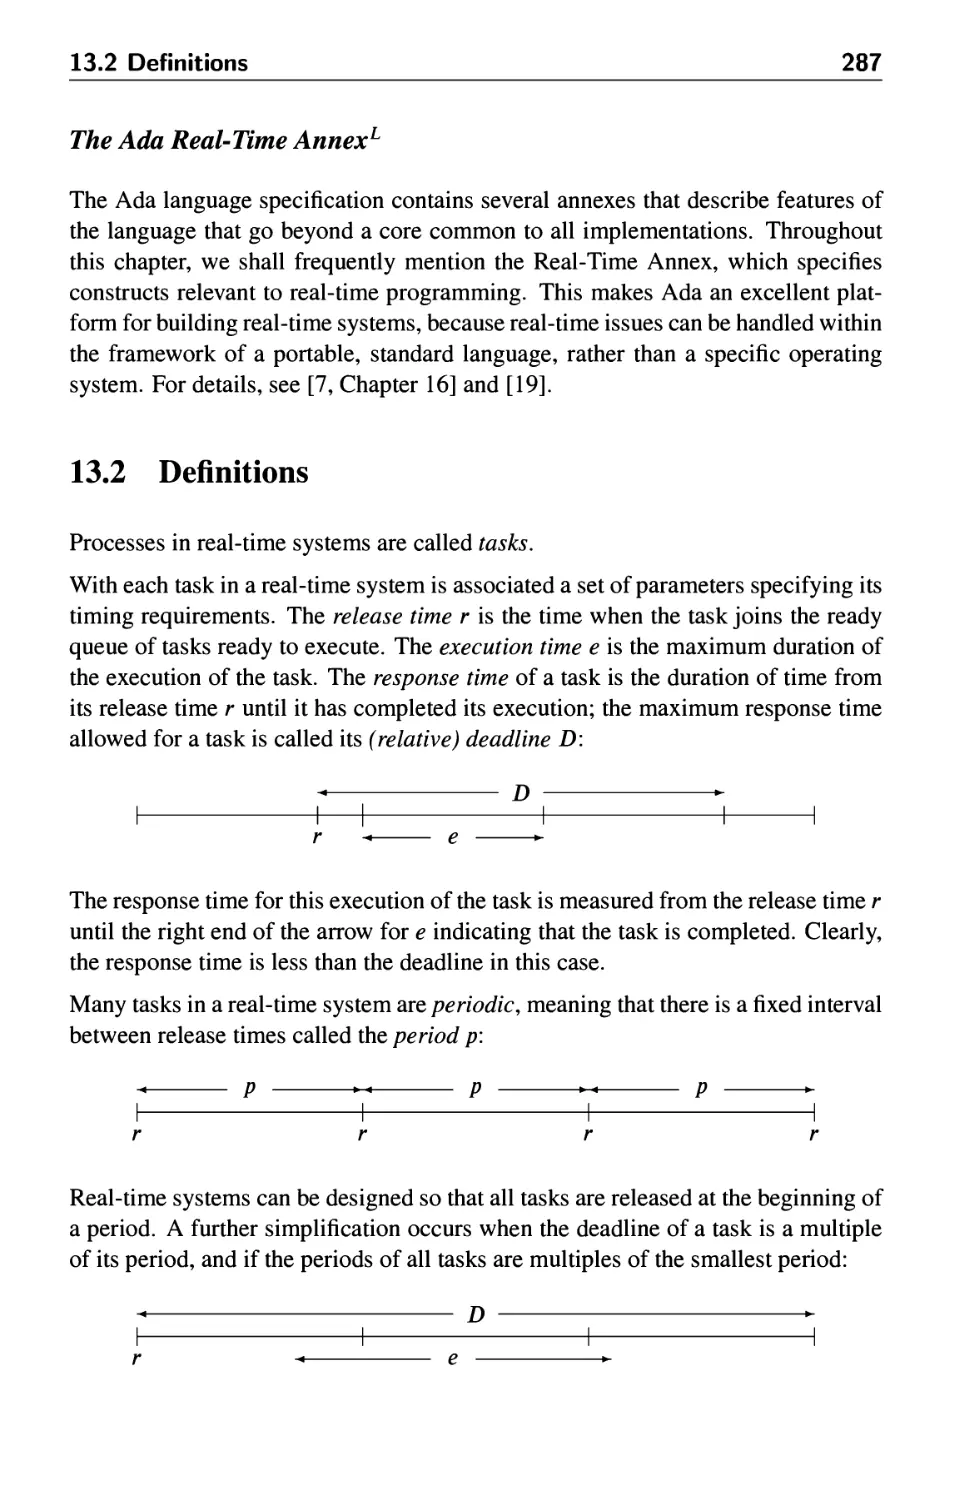 13.2 Definitions